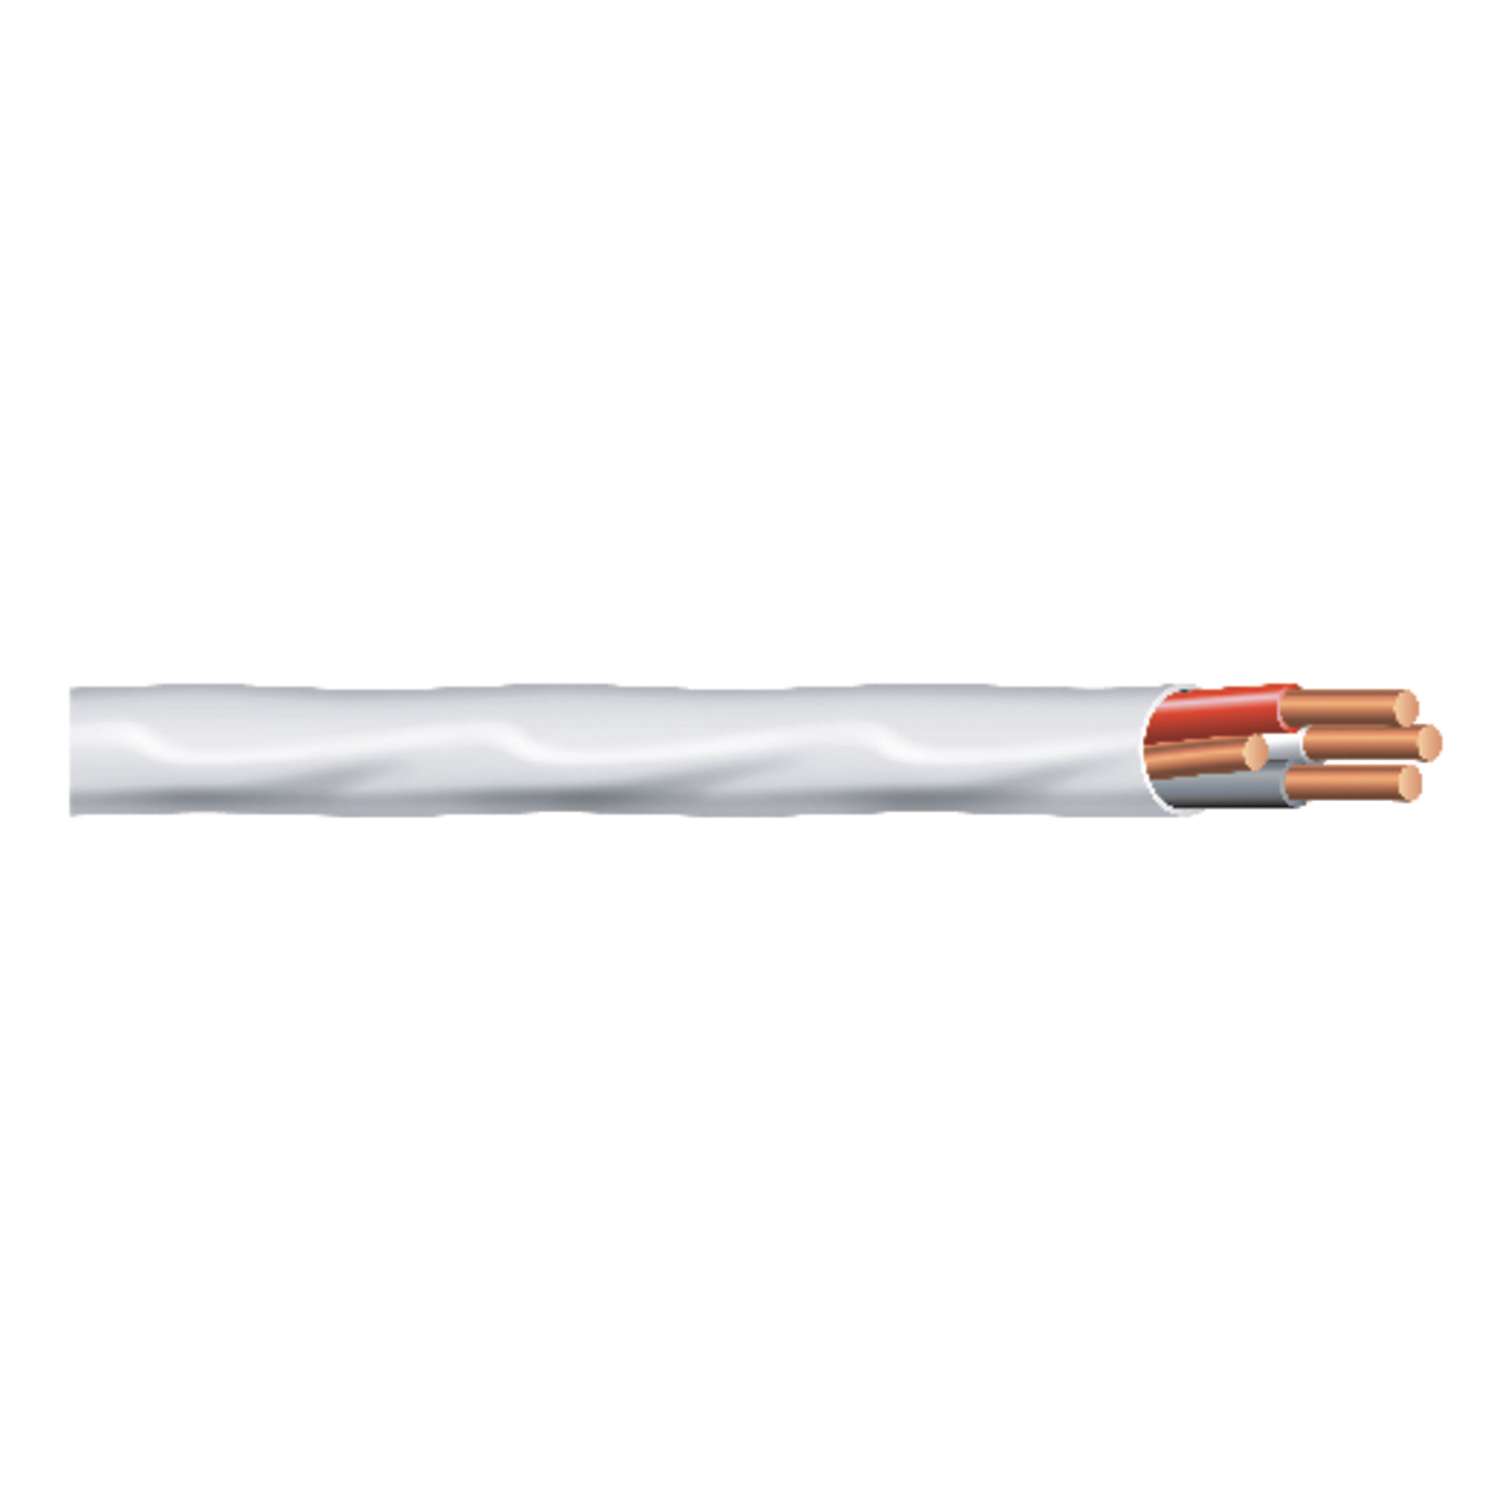 NEW 100' 14/3 W/GROUND NM-B ROMEX HOUSE WIRE/CABLE 